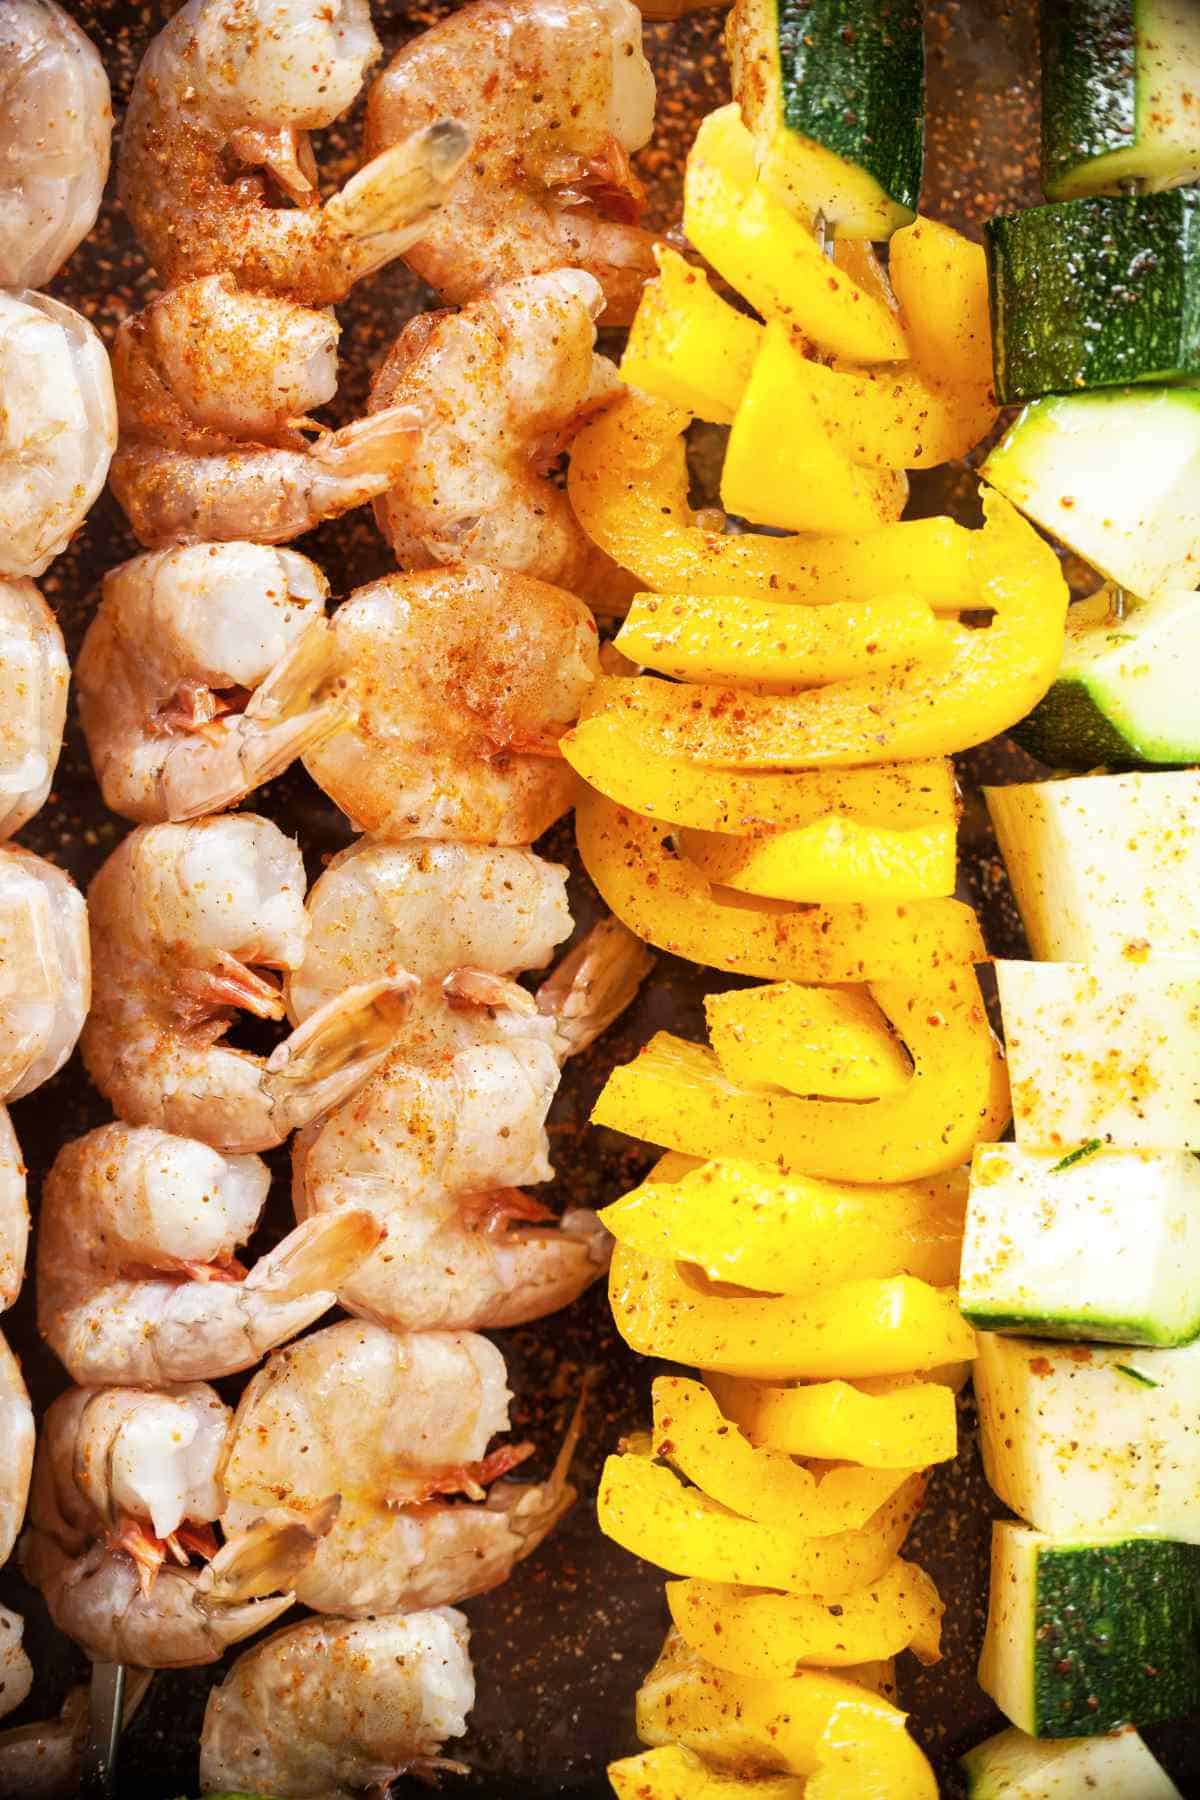 shrimp threaded on sticks next to yellow peppers and zucchini threaded on sticks.